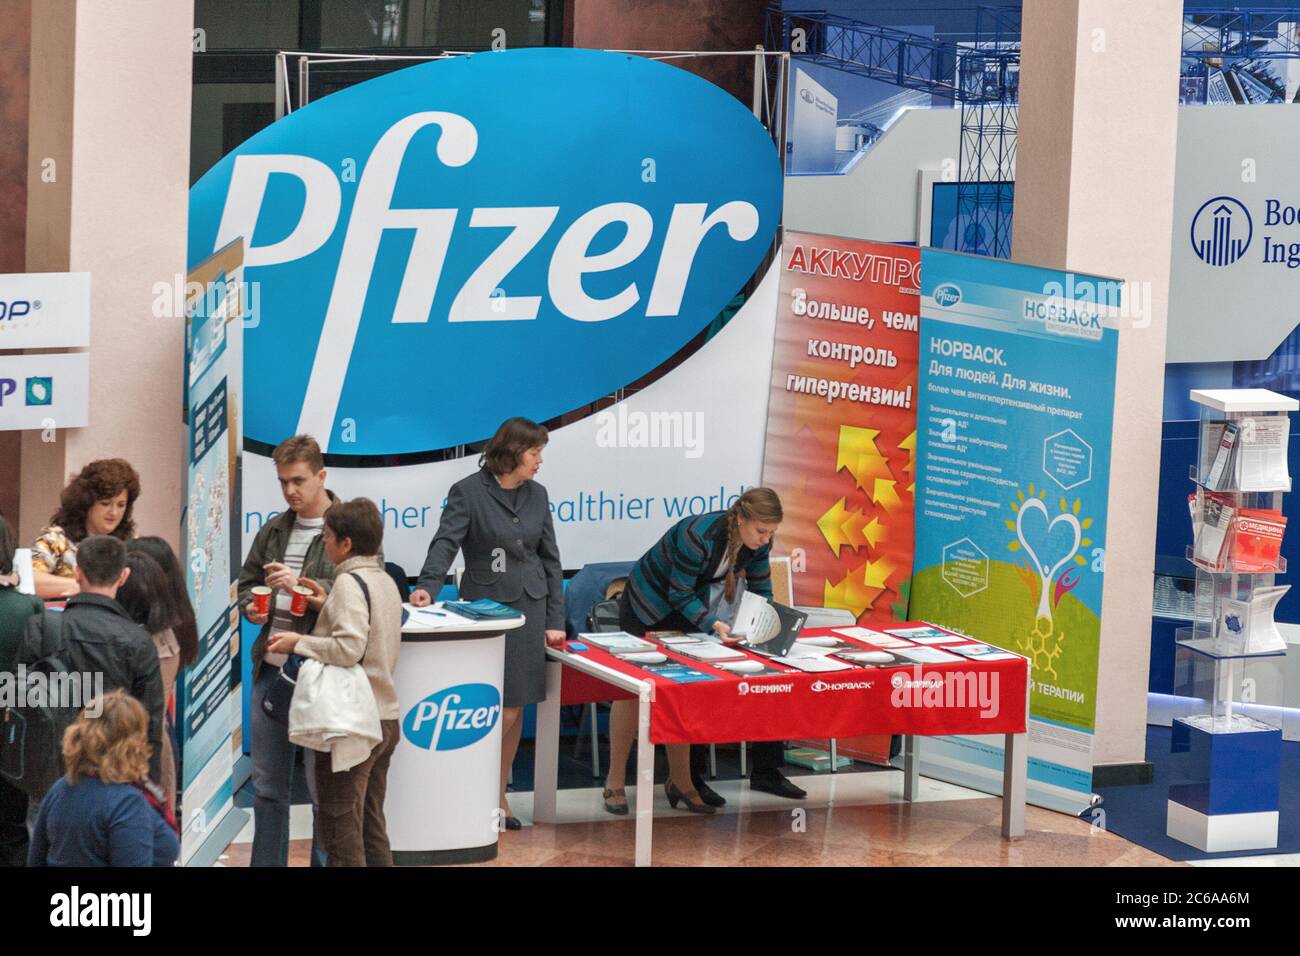 KYIV, UKRAINE - SEPTEMBER 24, 2014: People visit Pfizer American pharmaceutical company booth at XV National Congress of Cardiologists in Olympiyskiy Stock Photo